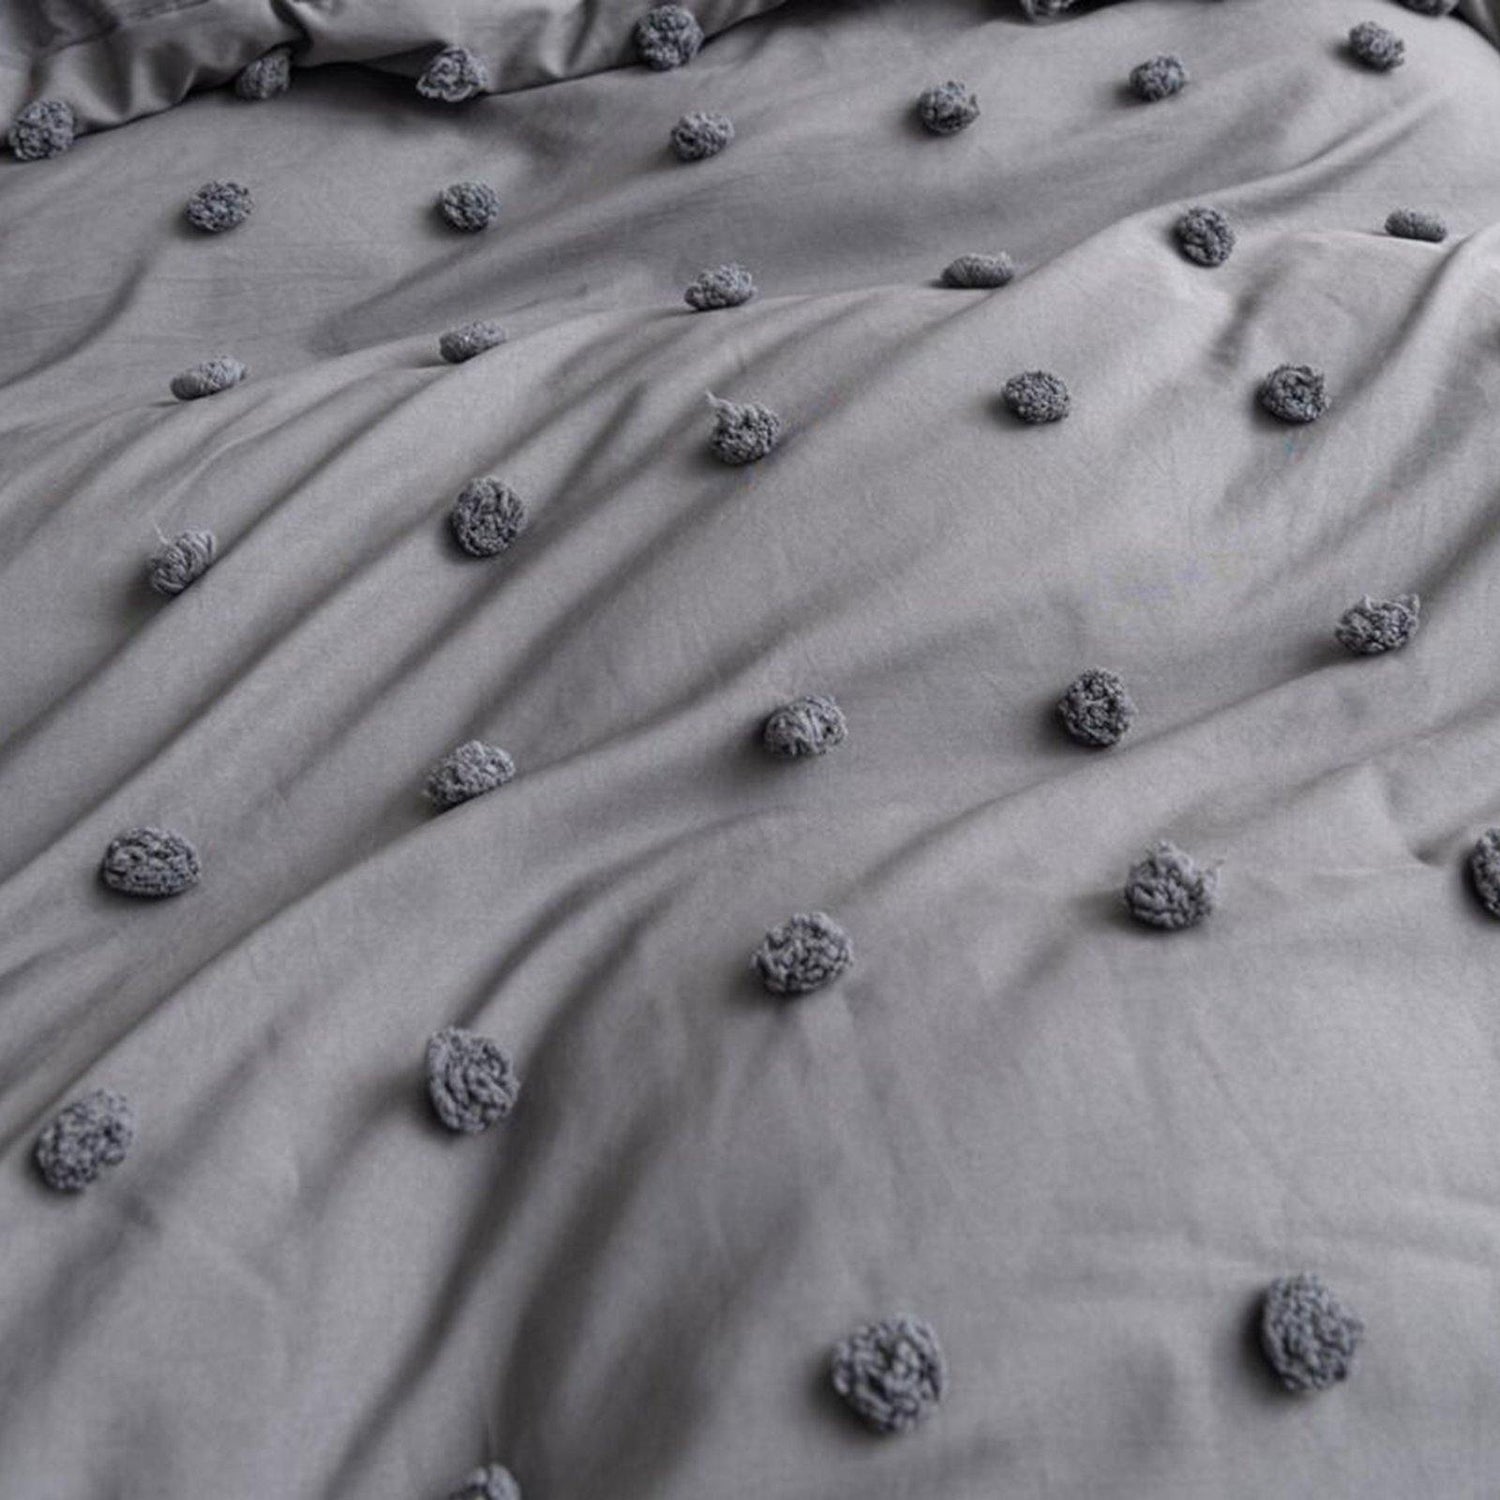 Dark Gray Tufted Dot comforter set bedroom bedding 3 Pieces Bedding Comforter with 2 Pillow Cases suitable for the whole season - Wongs bedding